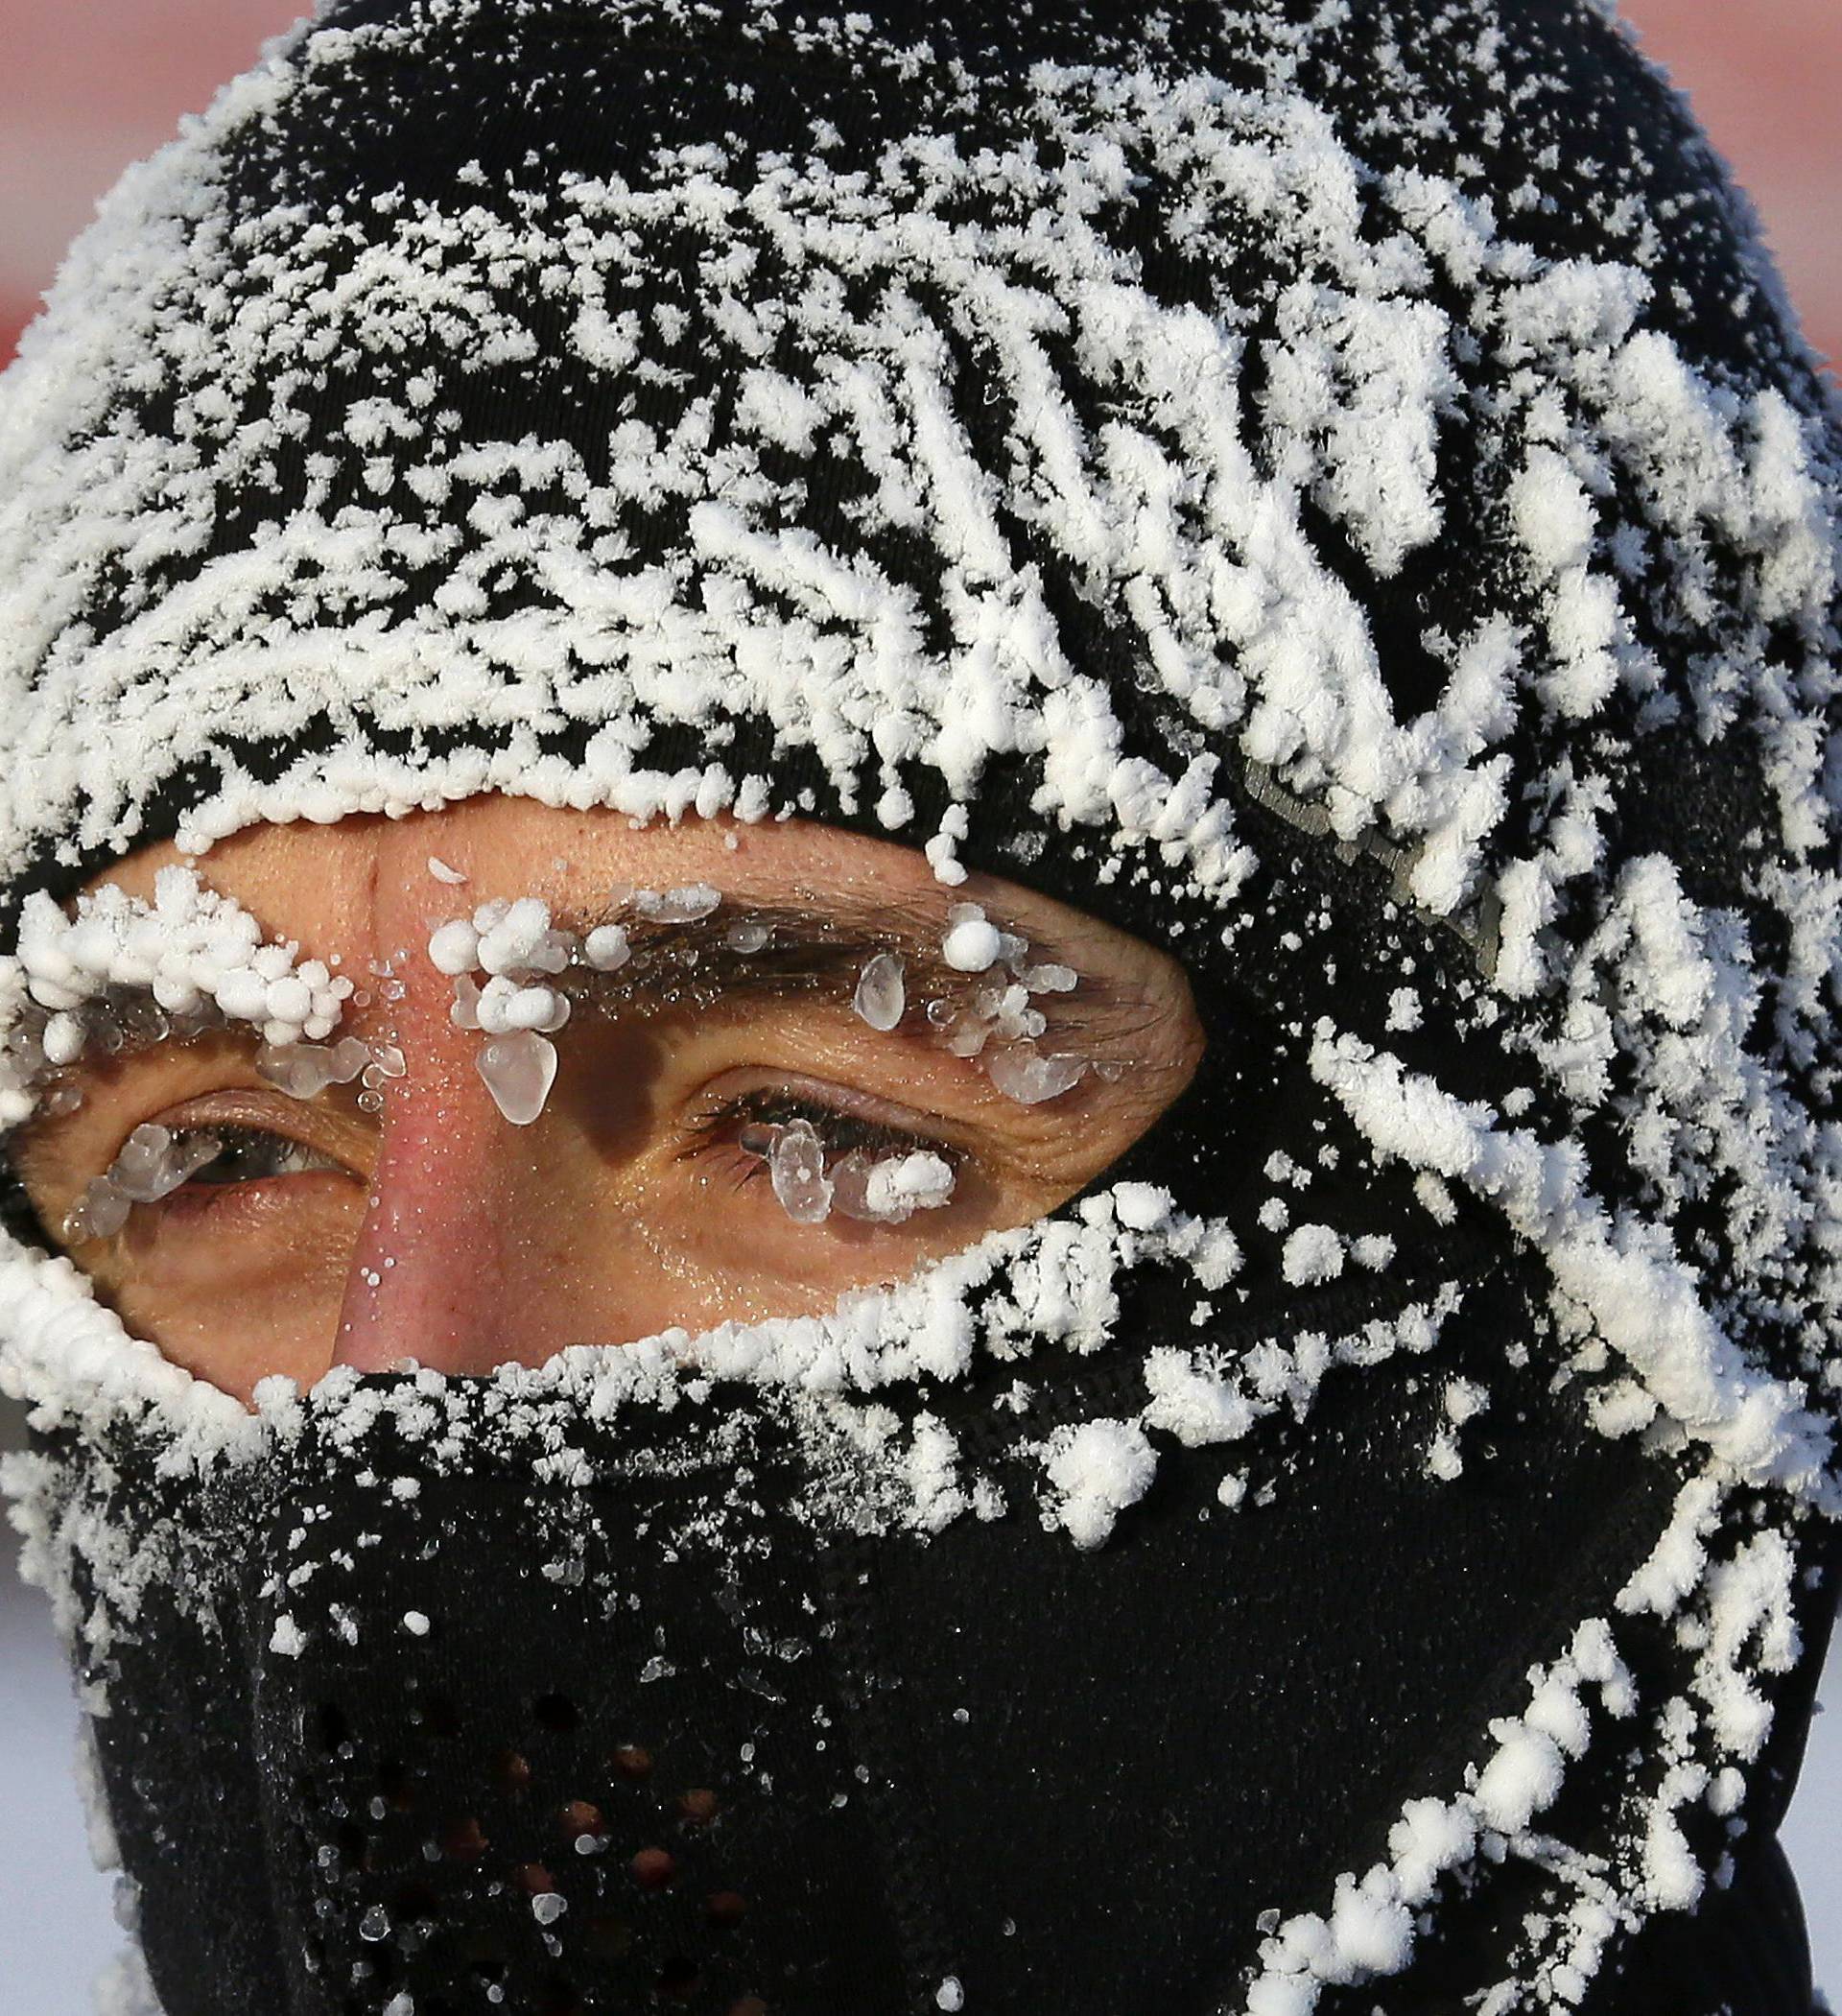 Runner with his face covered with hoarfrost competes during traditional half Marathon amateur competition marking Orthodox Christmas Day festivities in Krasnoyarsk